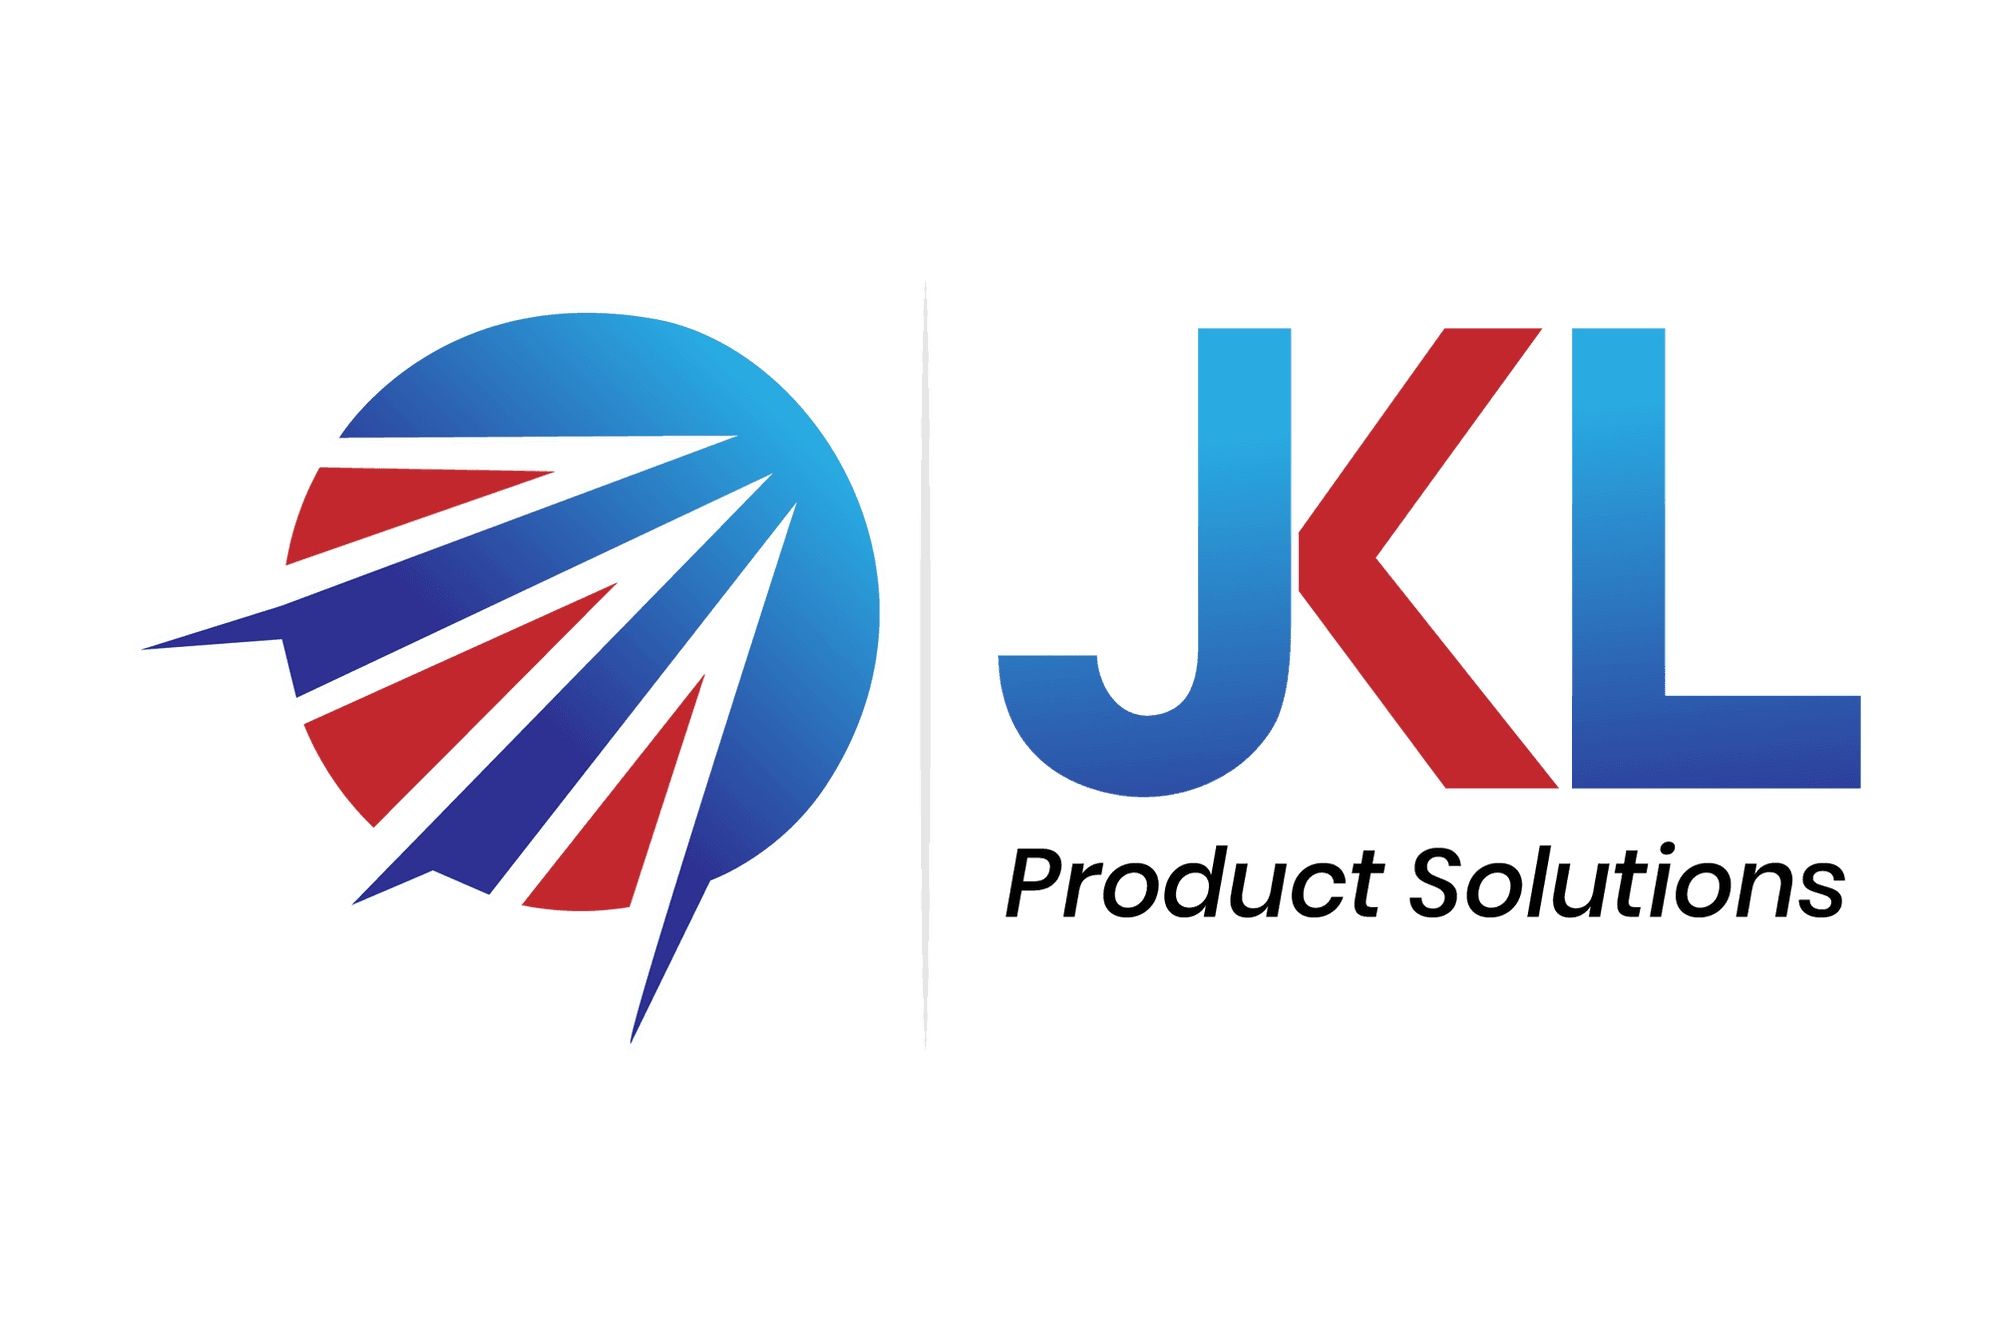 Product JK Product Solutions | JKL Product Solutions image